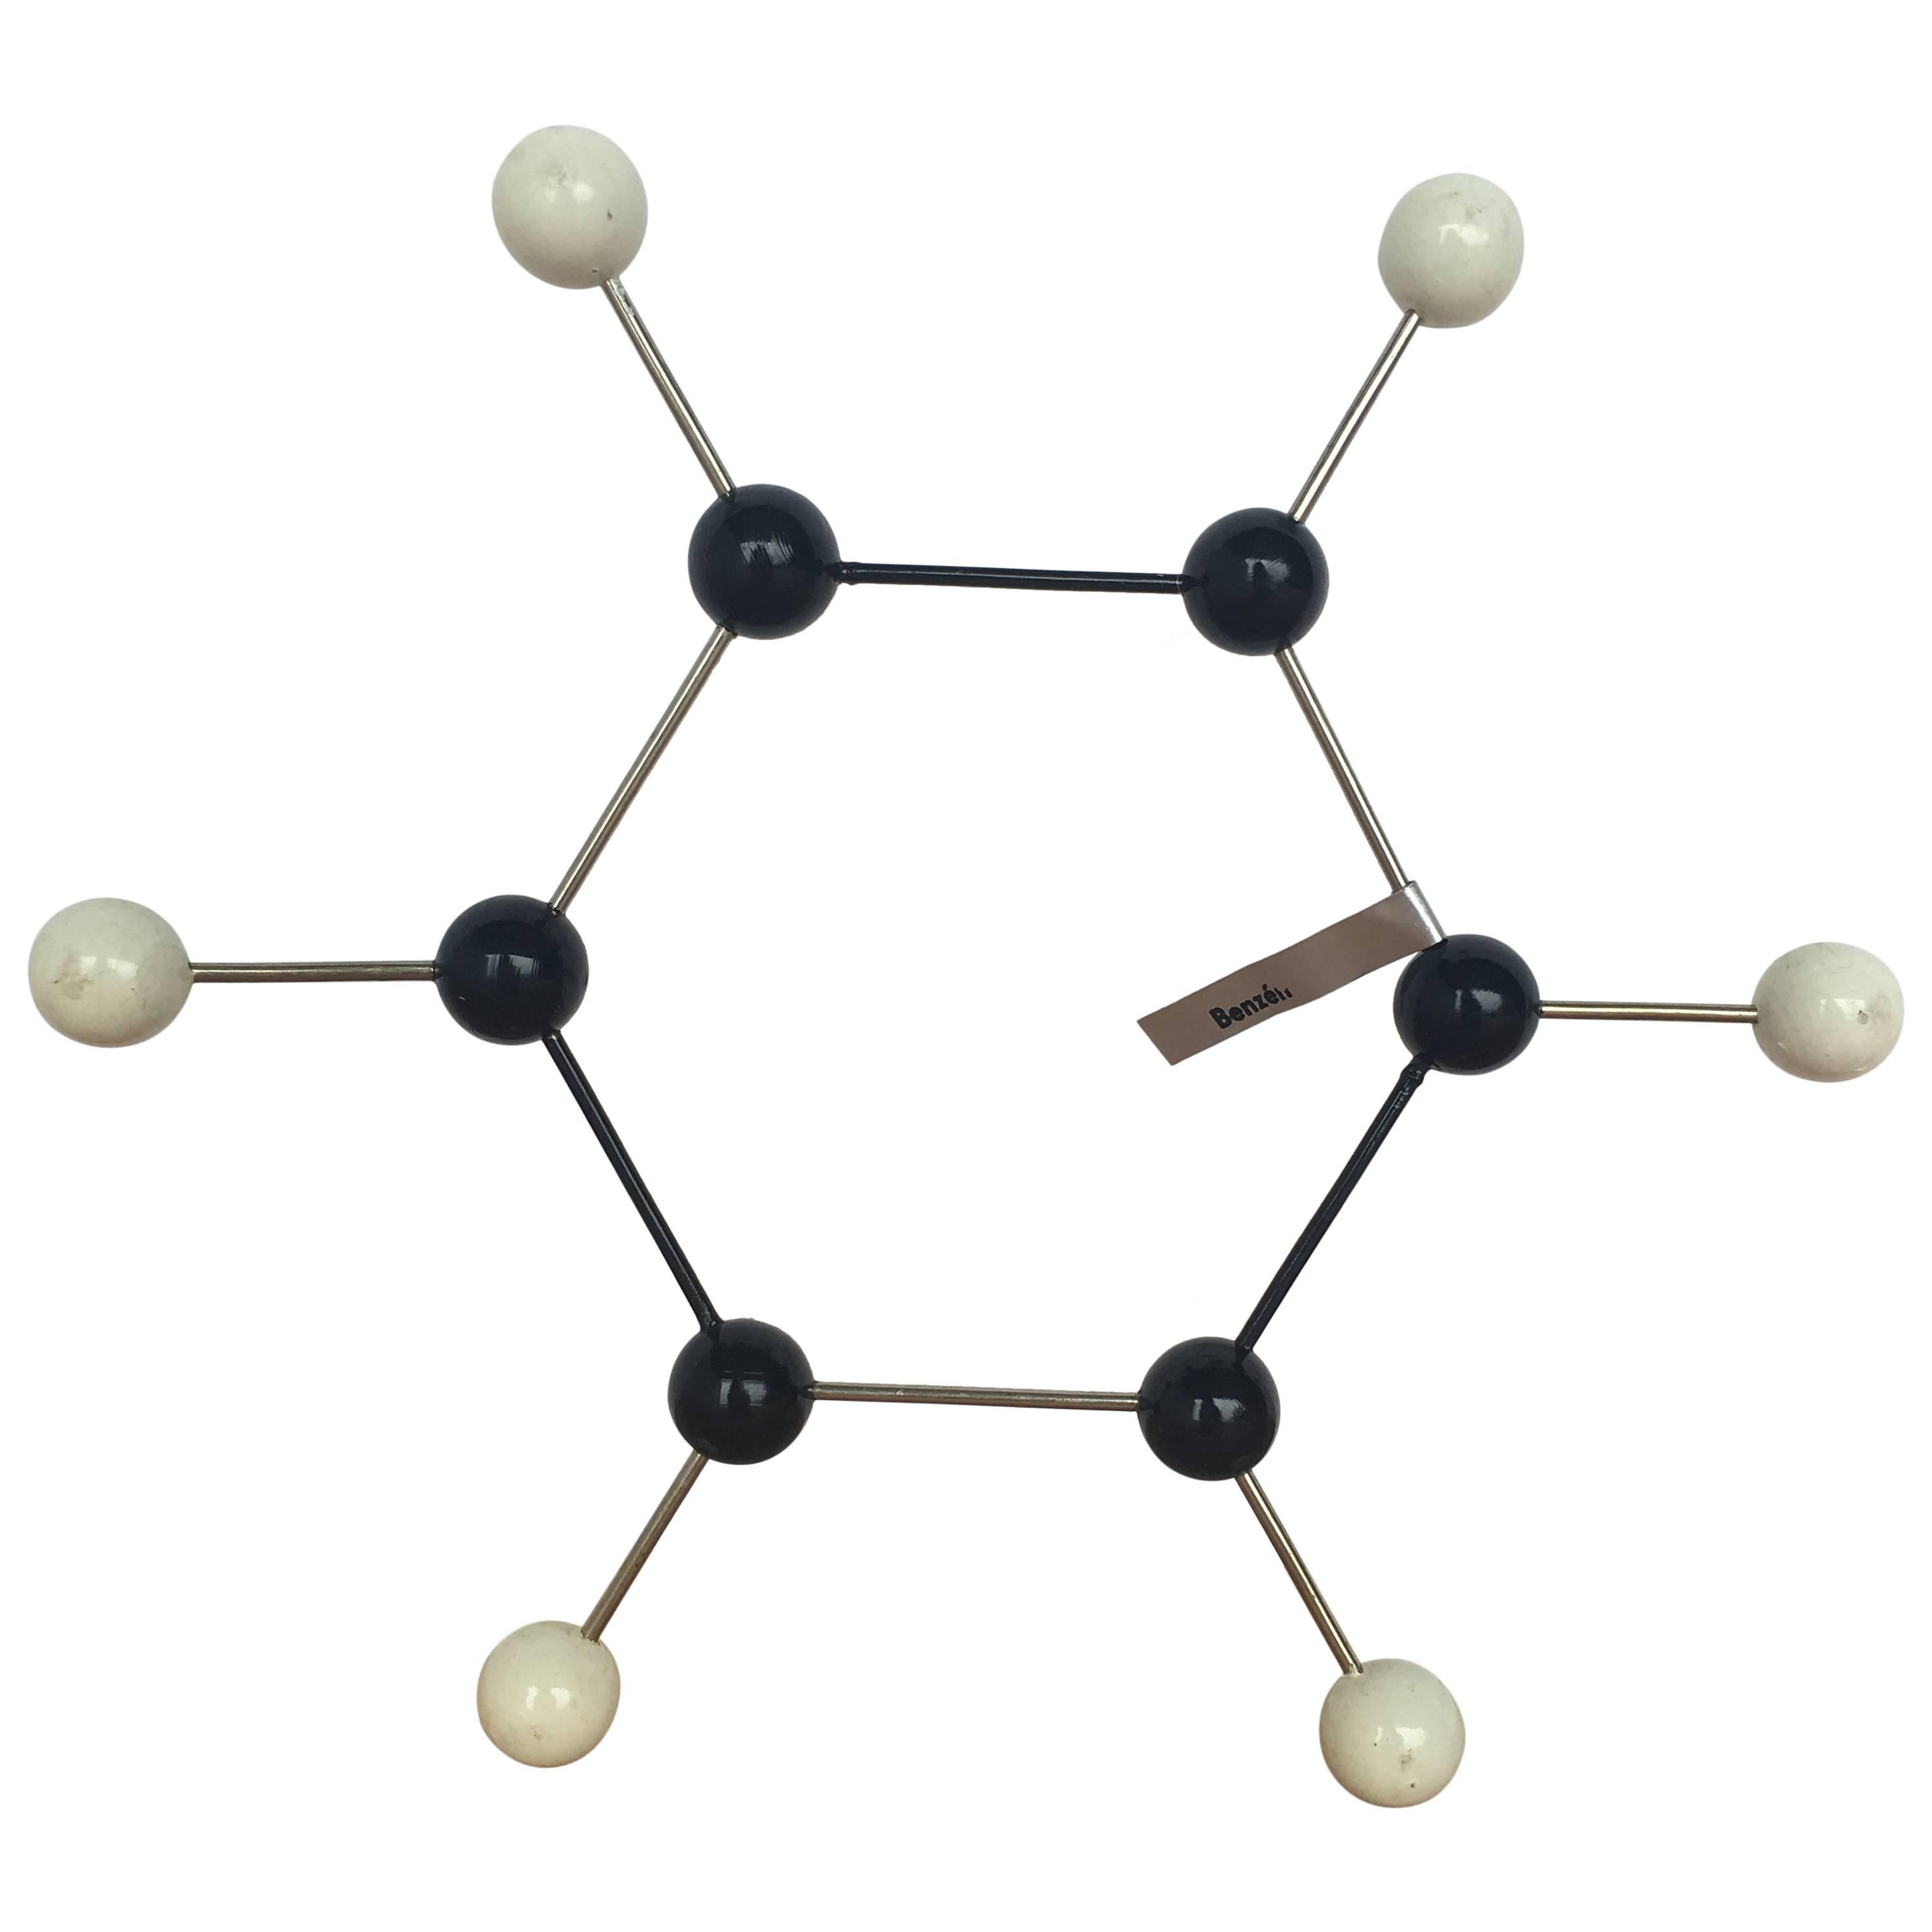 Vintage Ball and Stick Molecular Model of Benzene